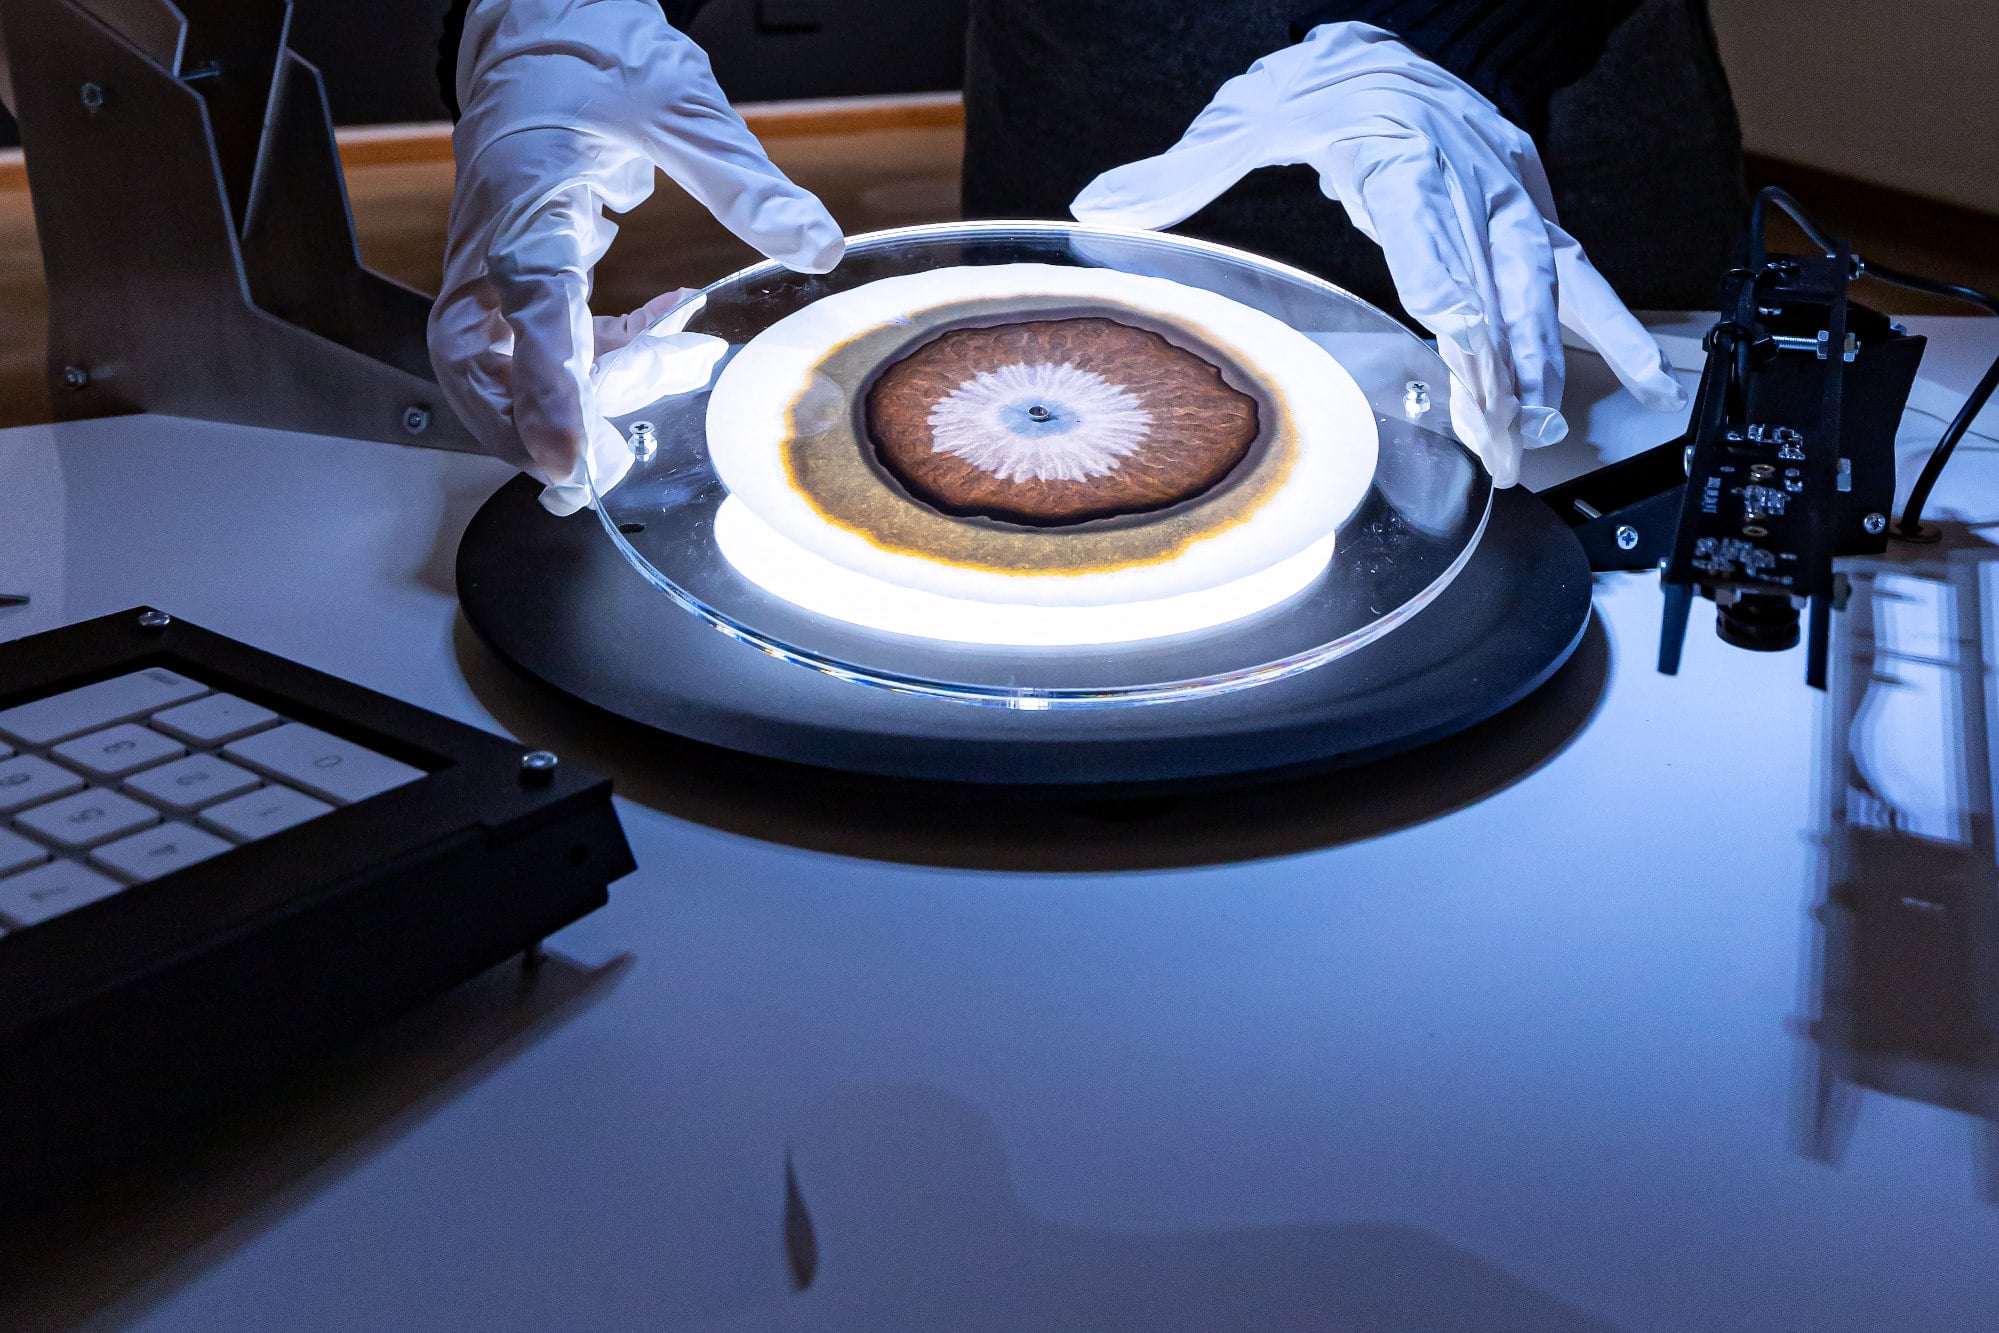 two hands in white gloves placing a disc with brown circular forms on a scanner that resembles a turntable